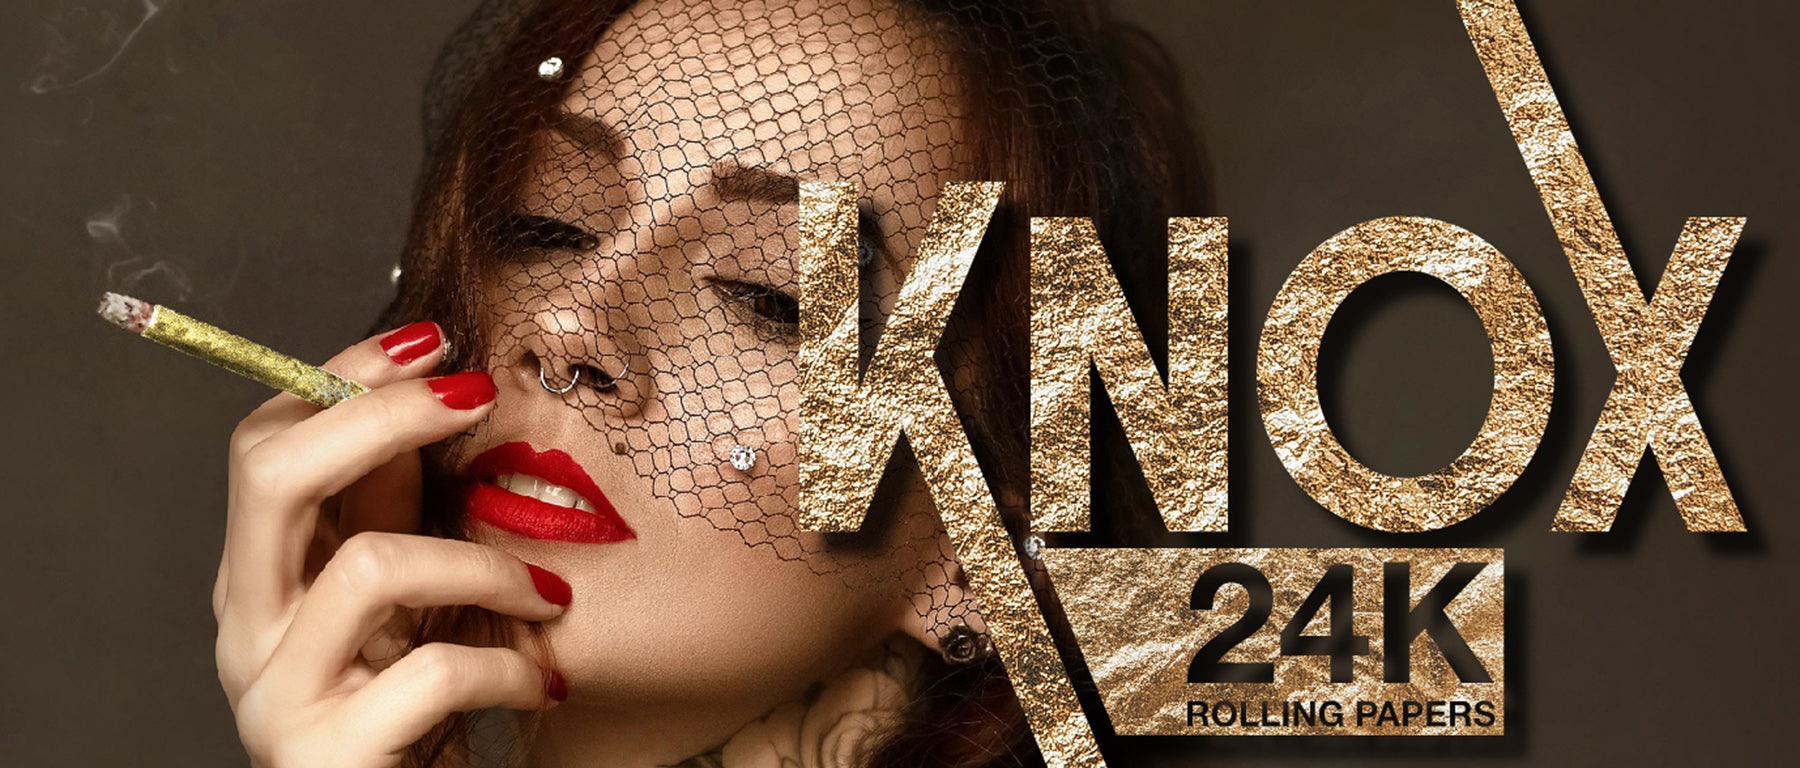 Knox 24K Gold Rolling Papers